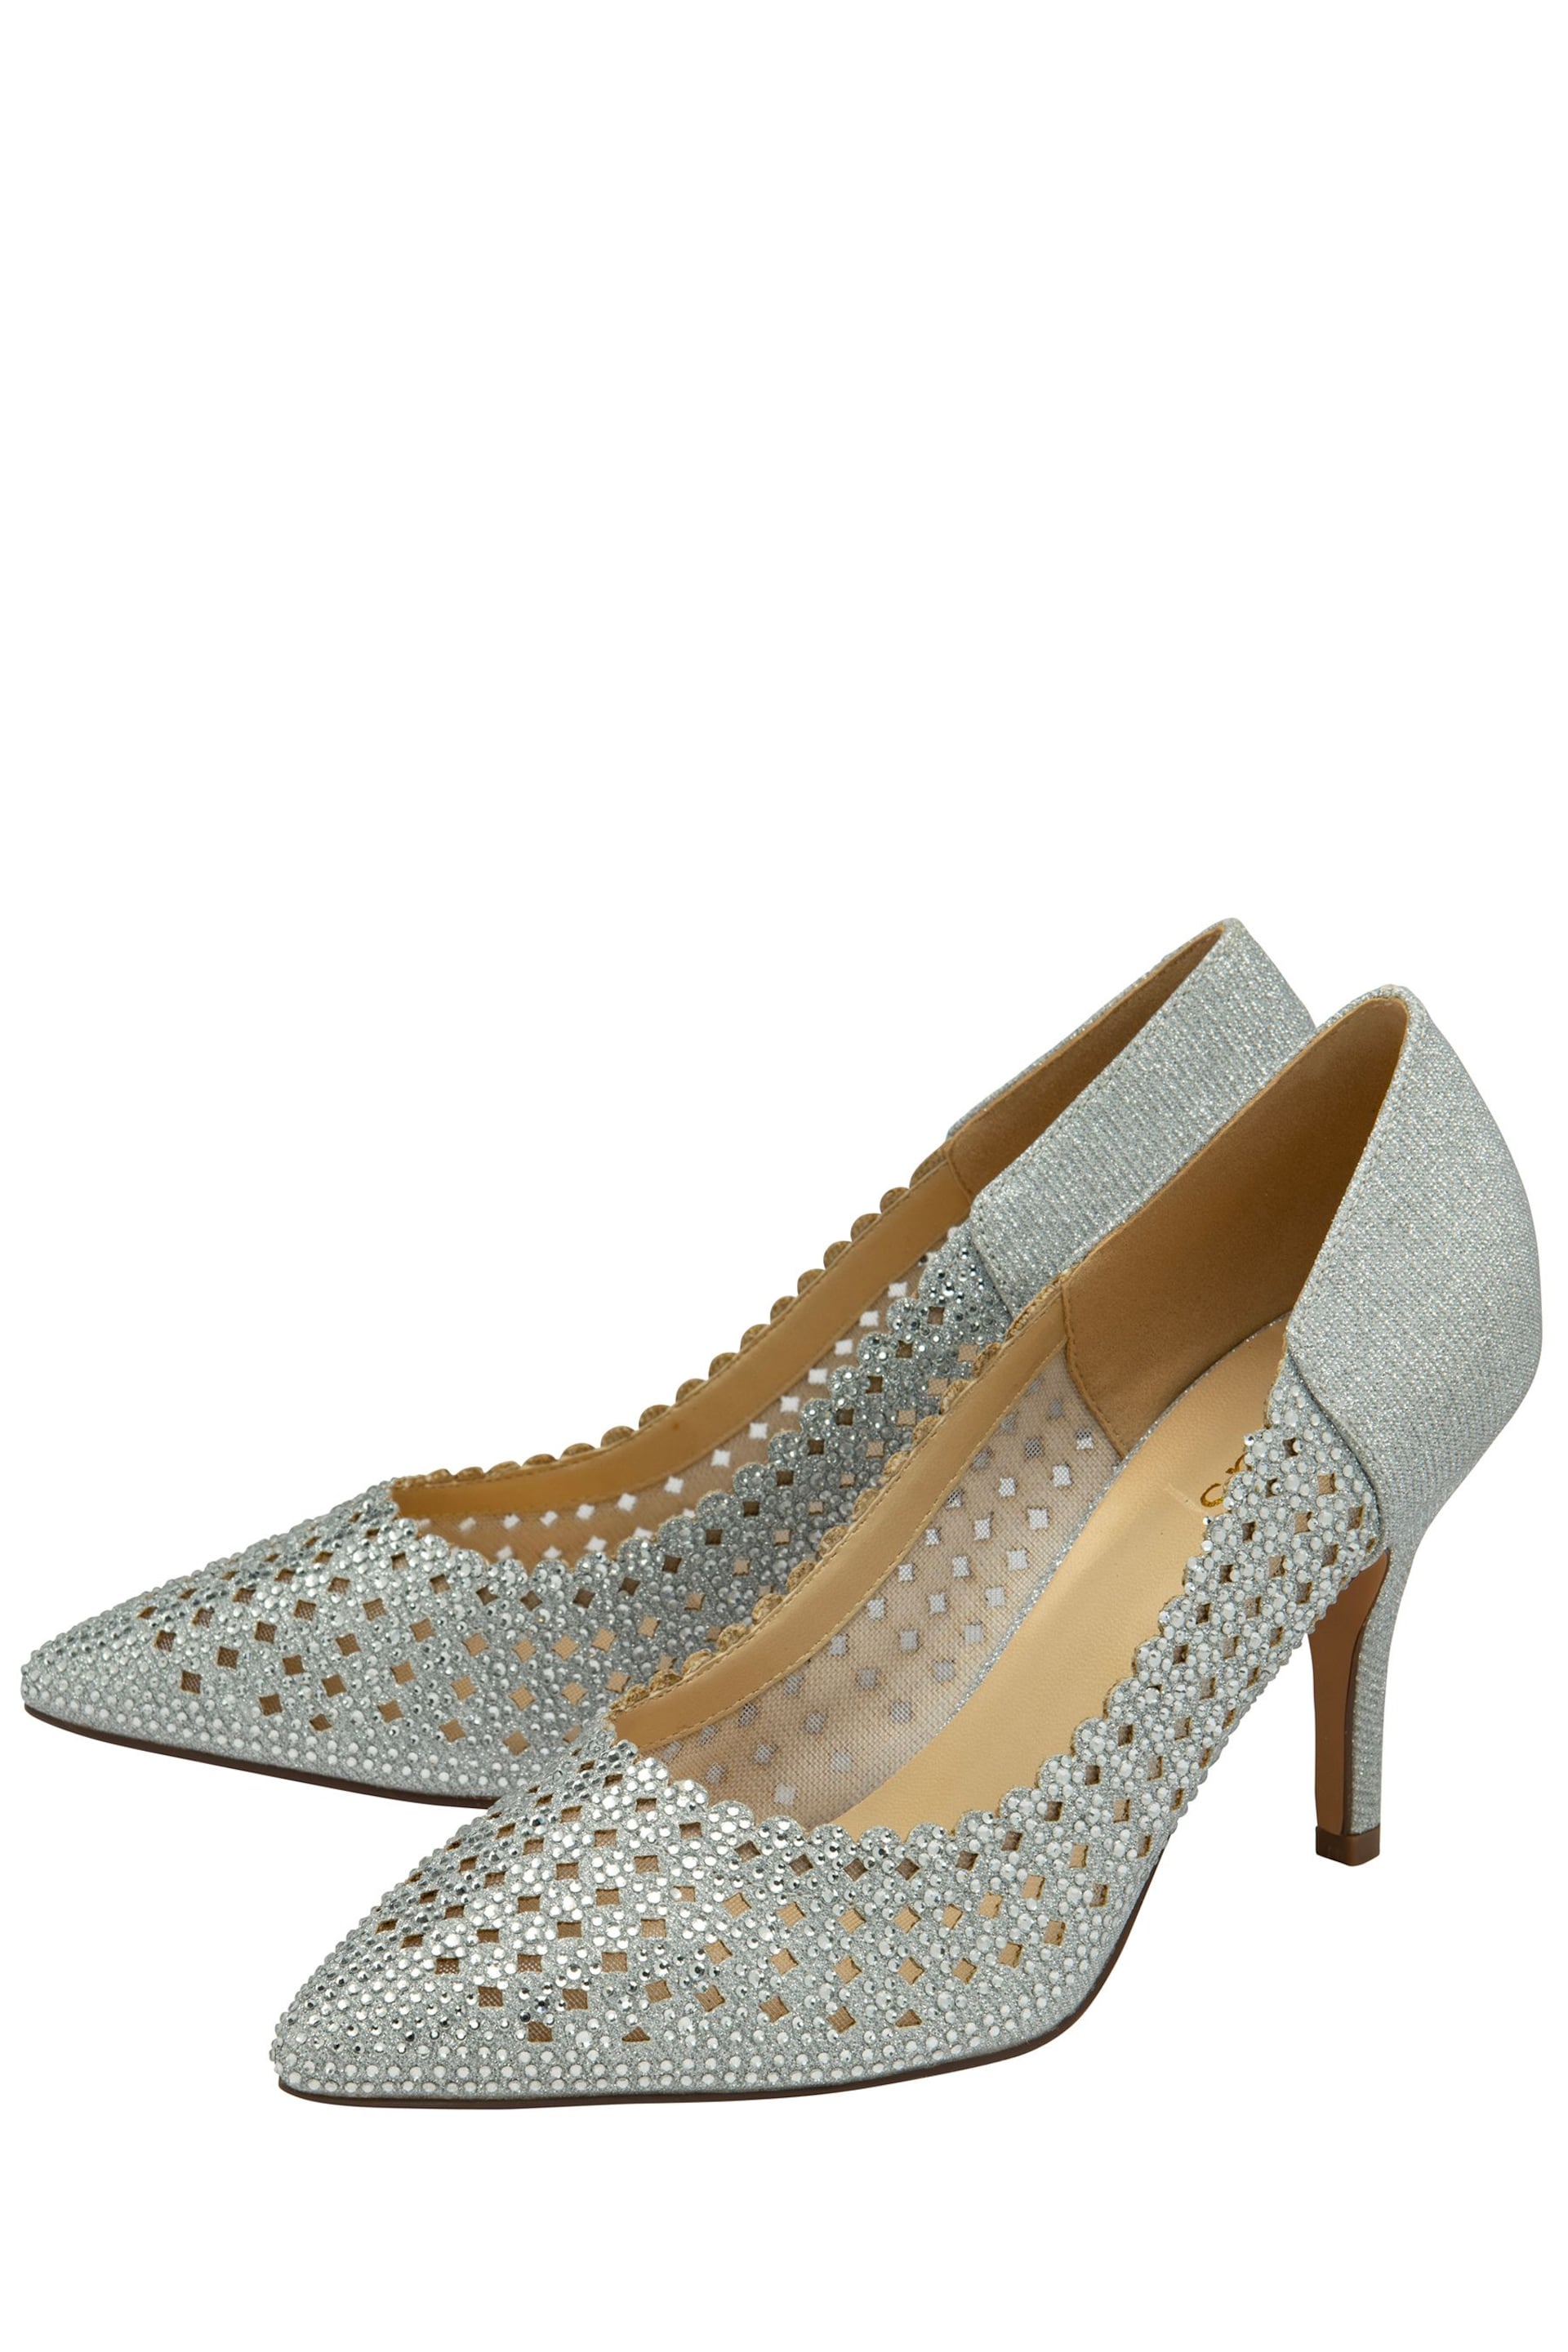 Lotus Silver Stiletto-Heel Pointed Toe Court Shoes - Image 3 of 4